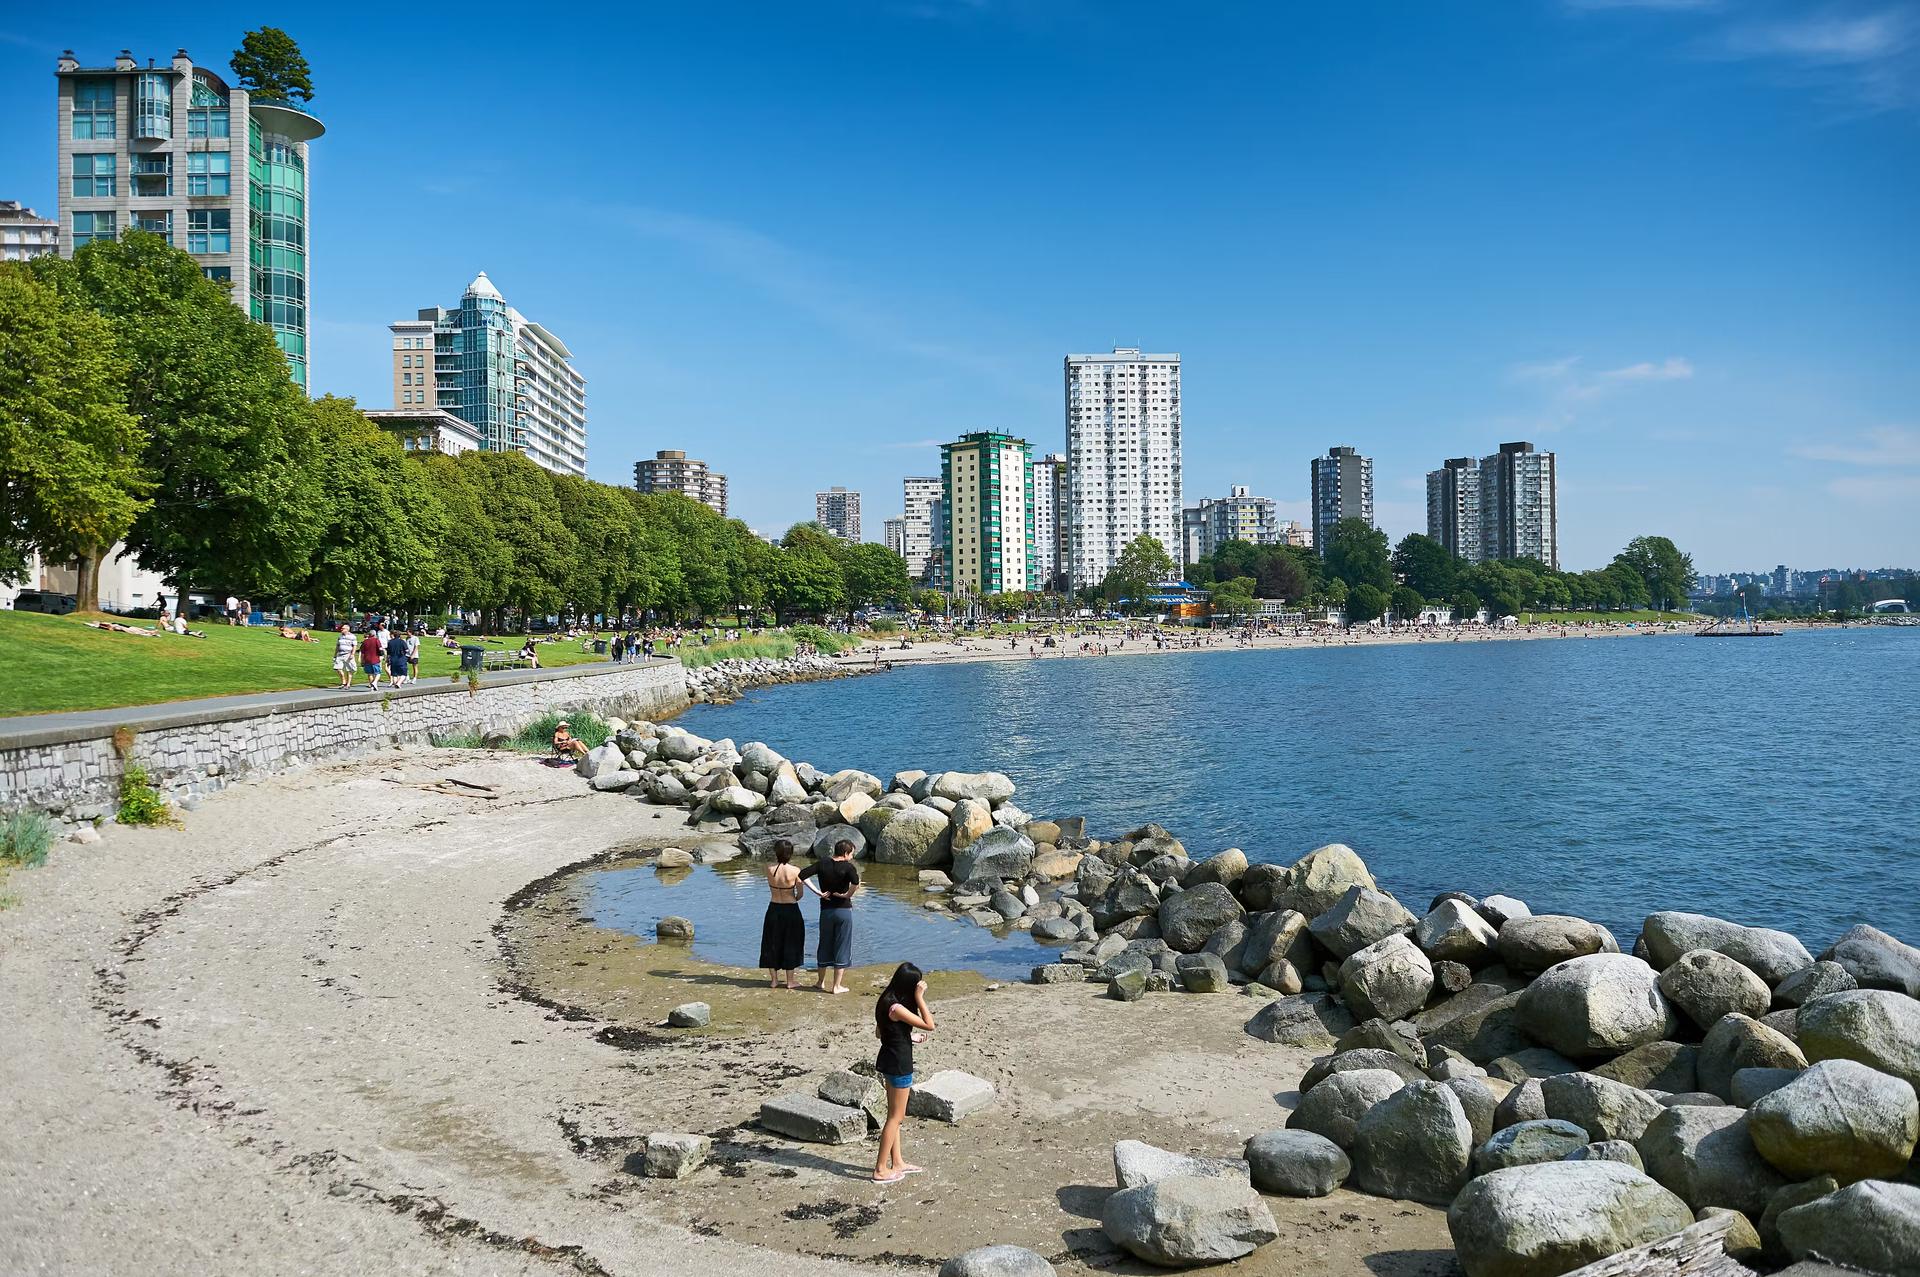 Panoramic view at English Bay with beach and people in West End, near Morton and Stanley Park